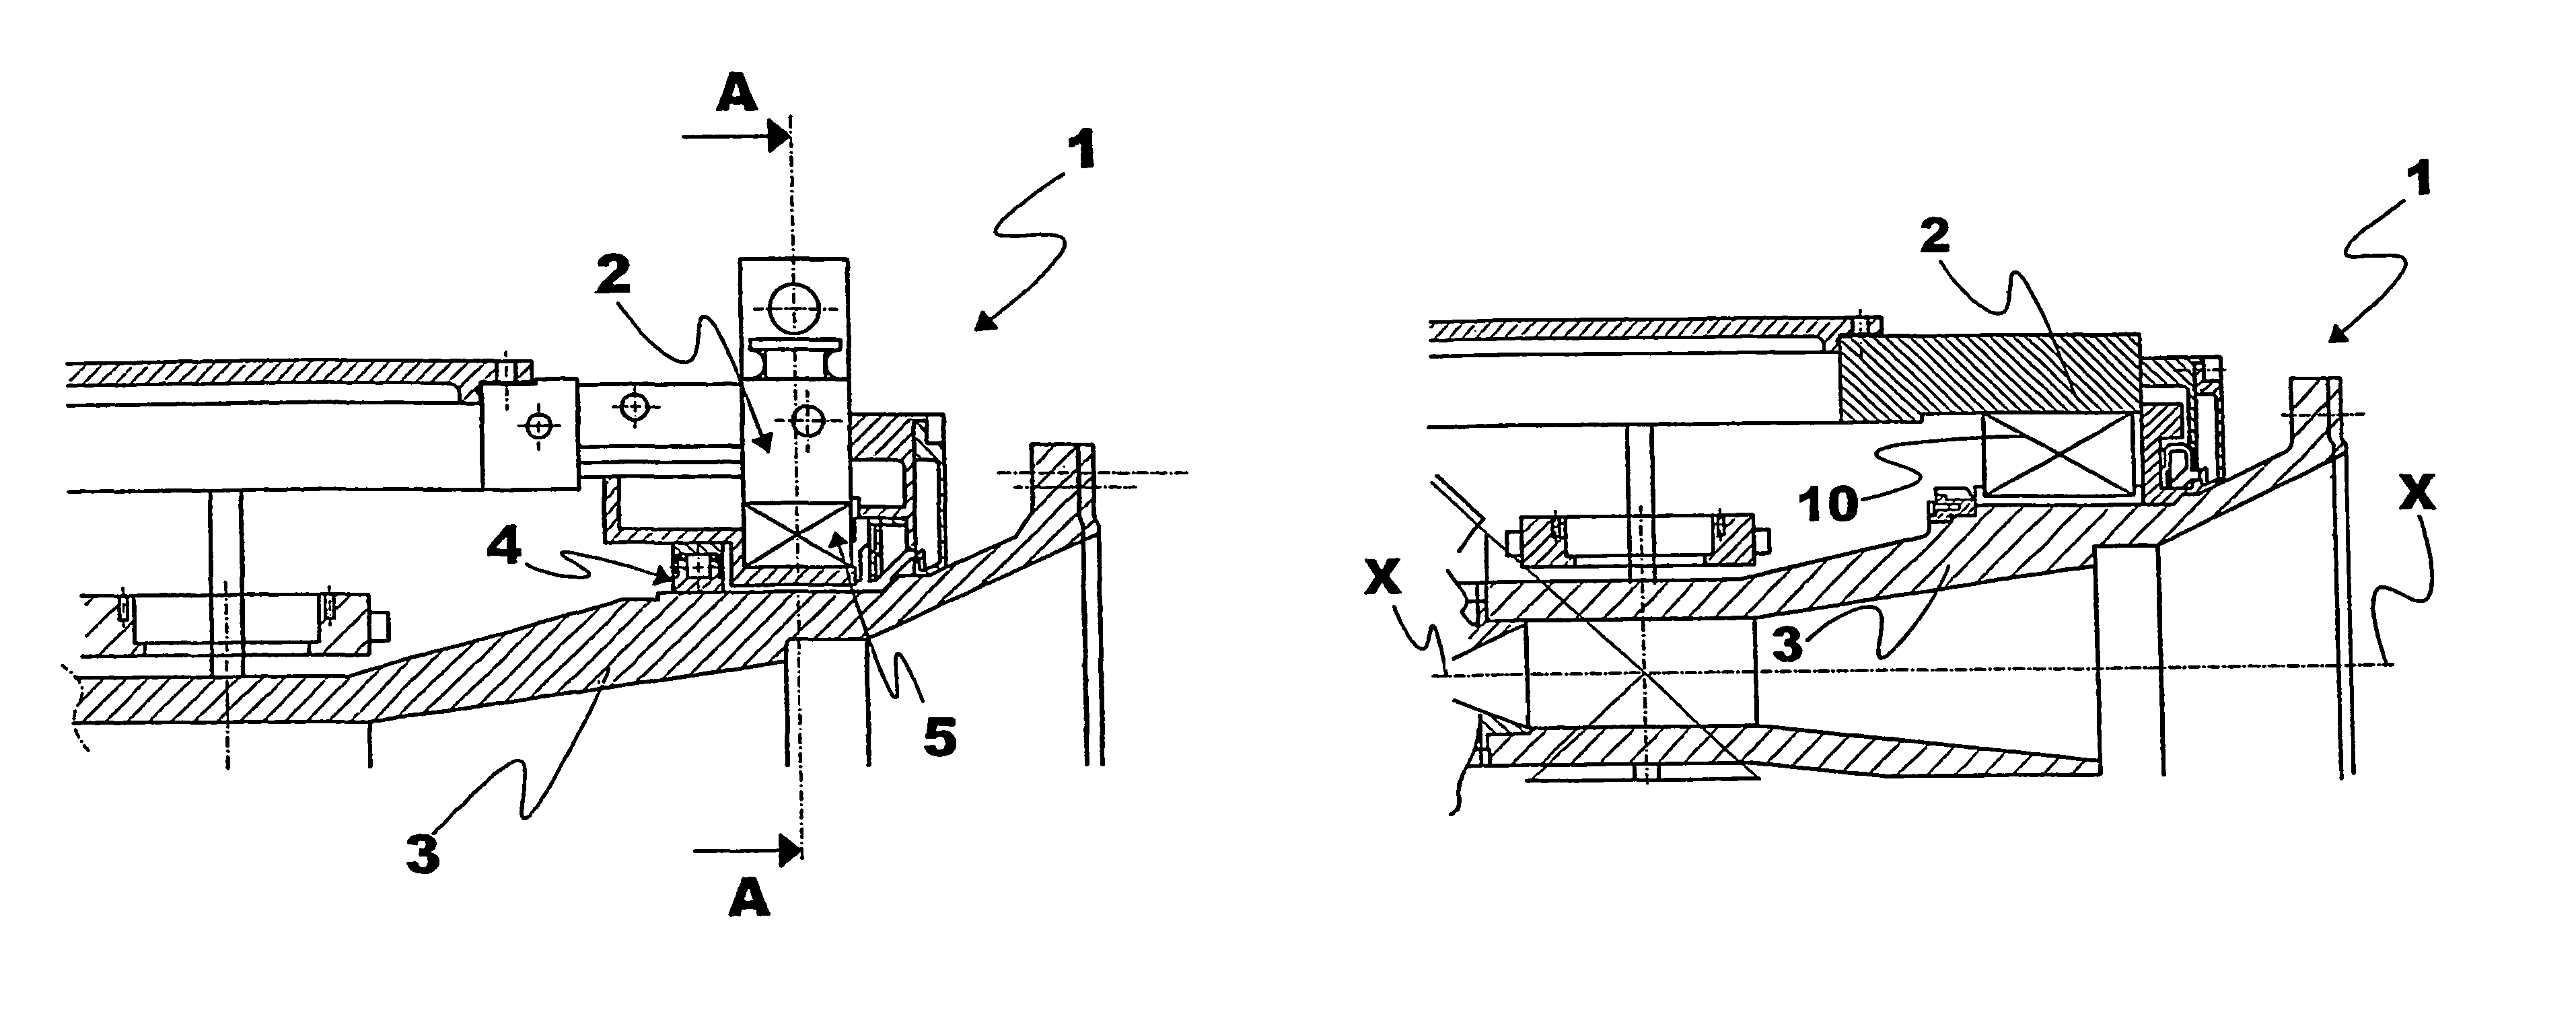 Laying head with a vibration damping device